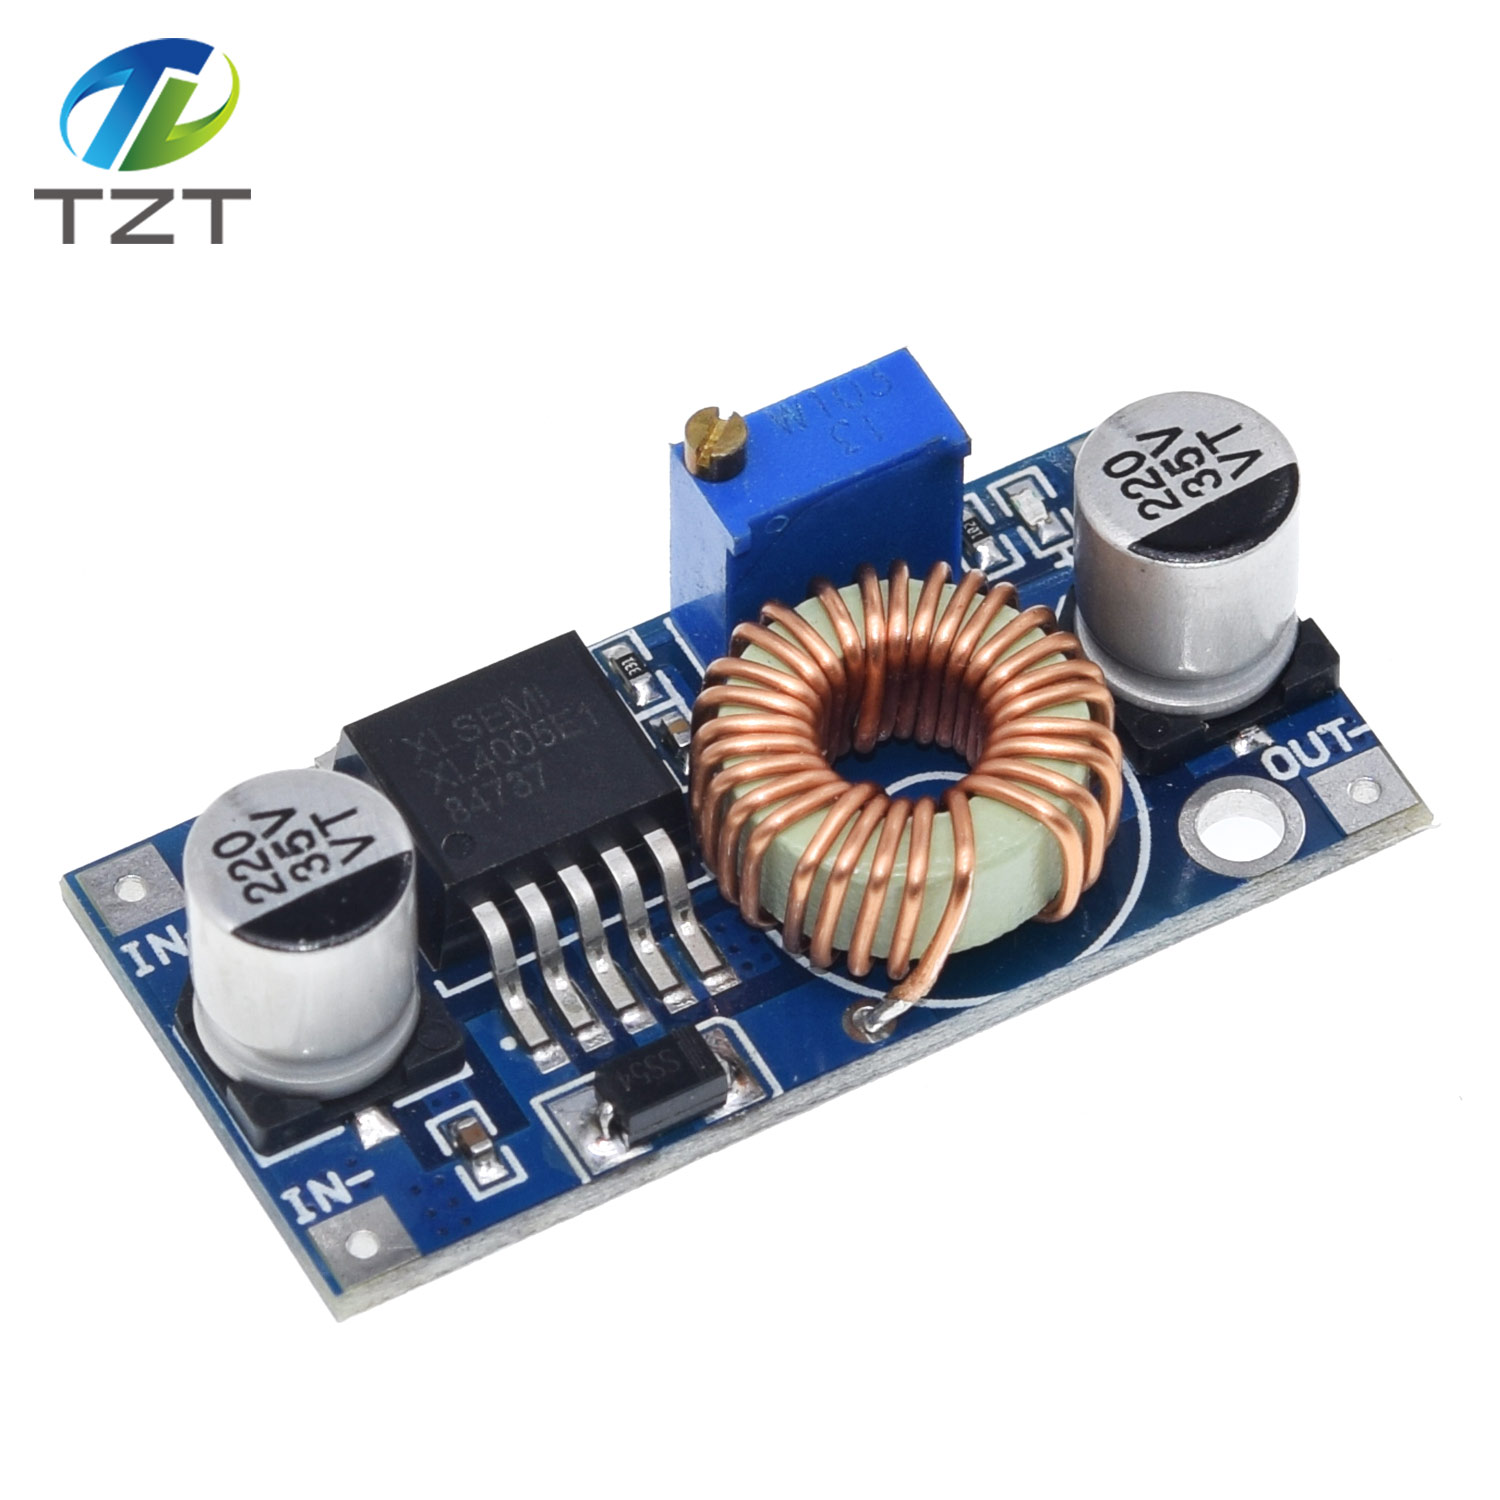 TZT XL4005 DSN5000 Beyond LM2596 DC-DC adjustable step-down 5A power Supply module,5A Large current Large power